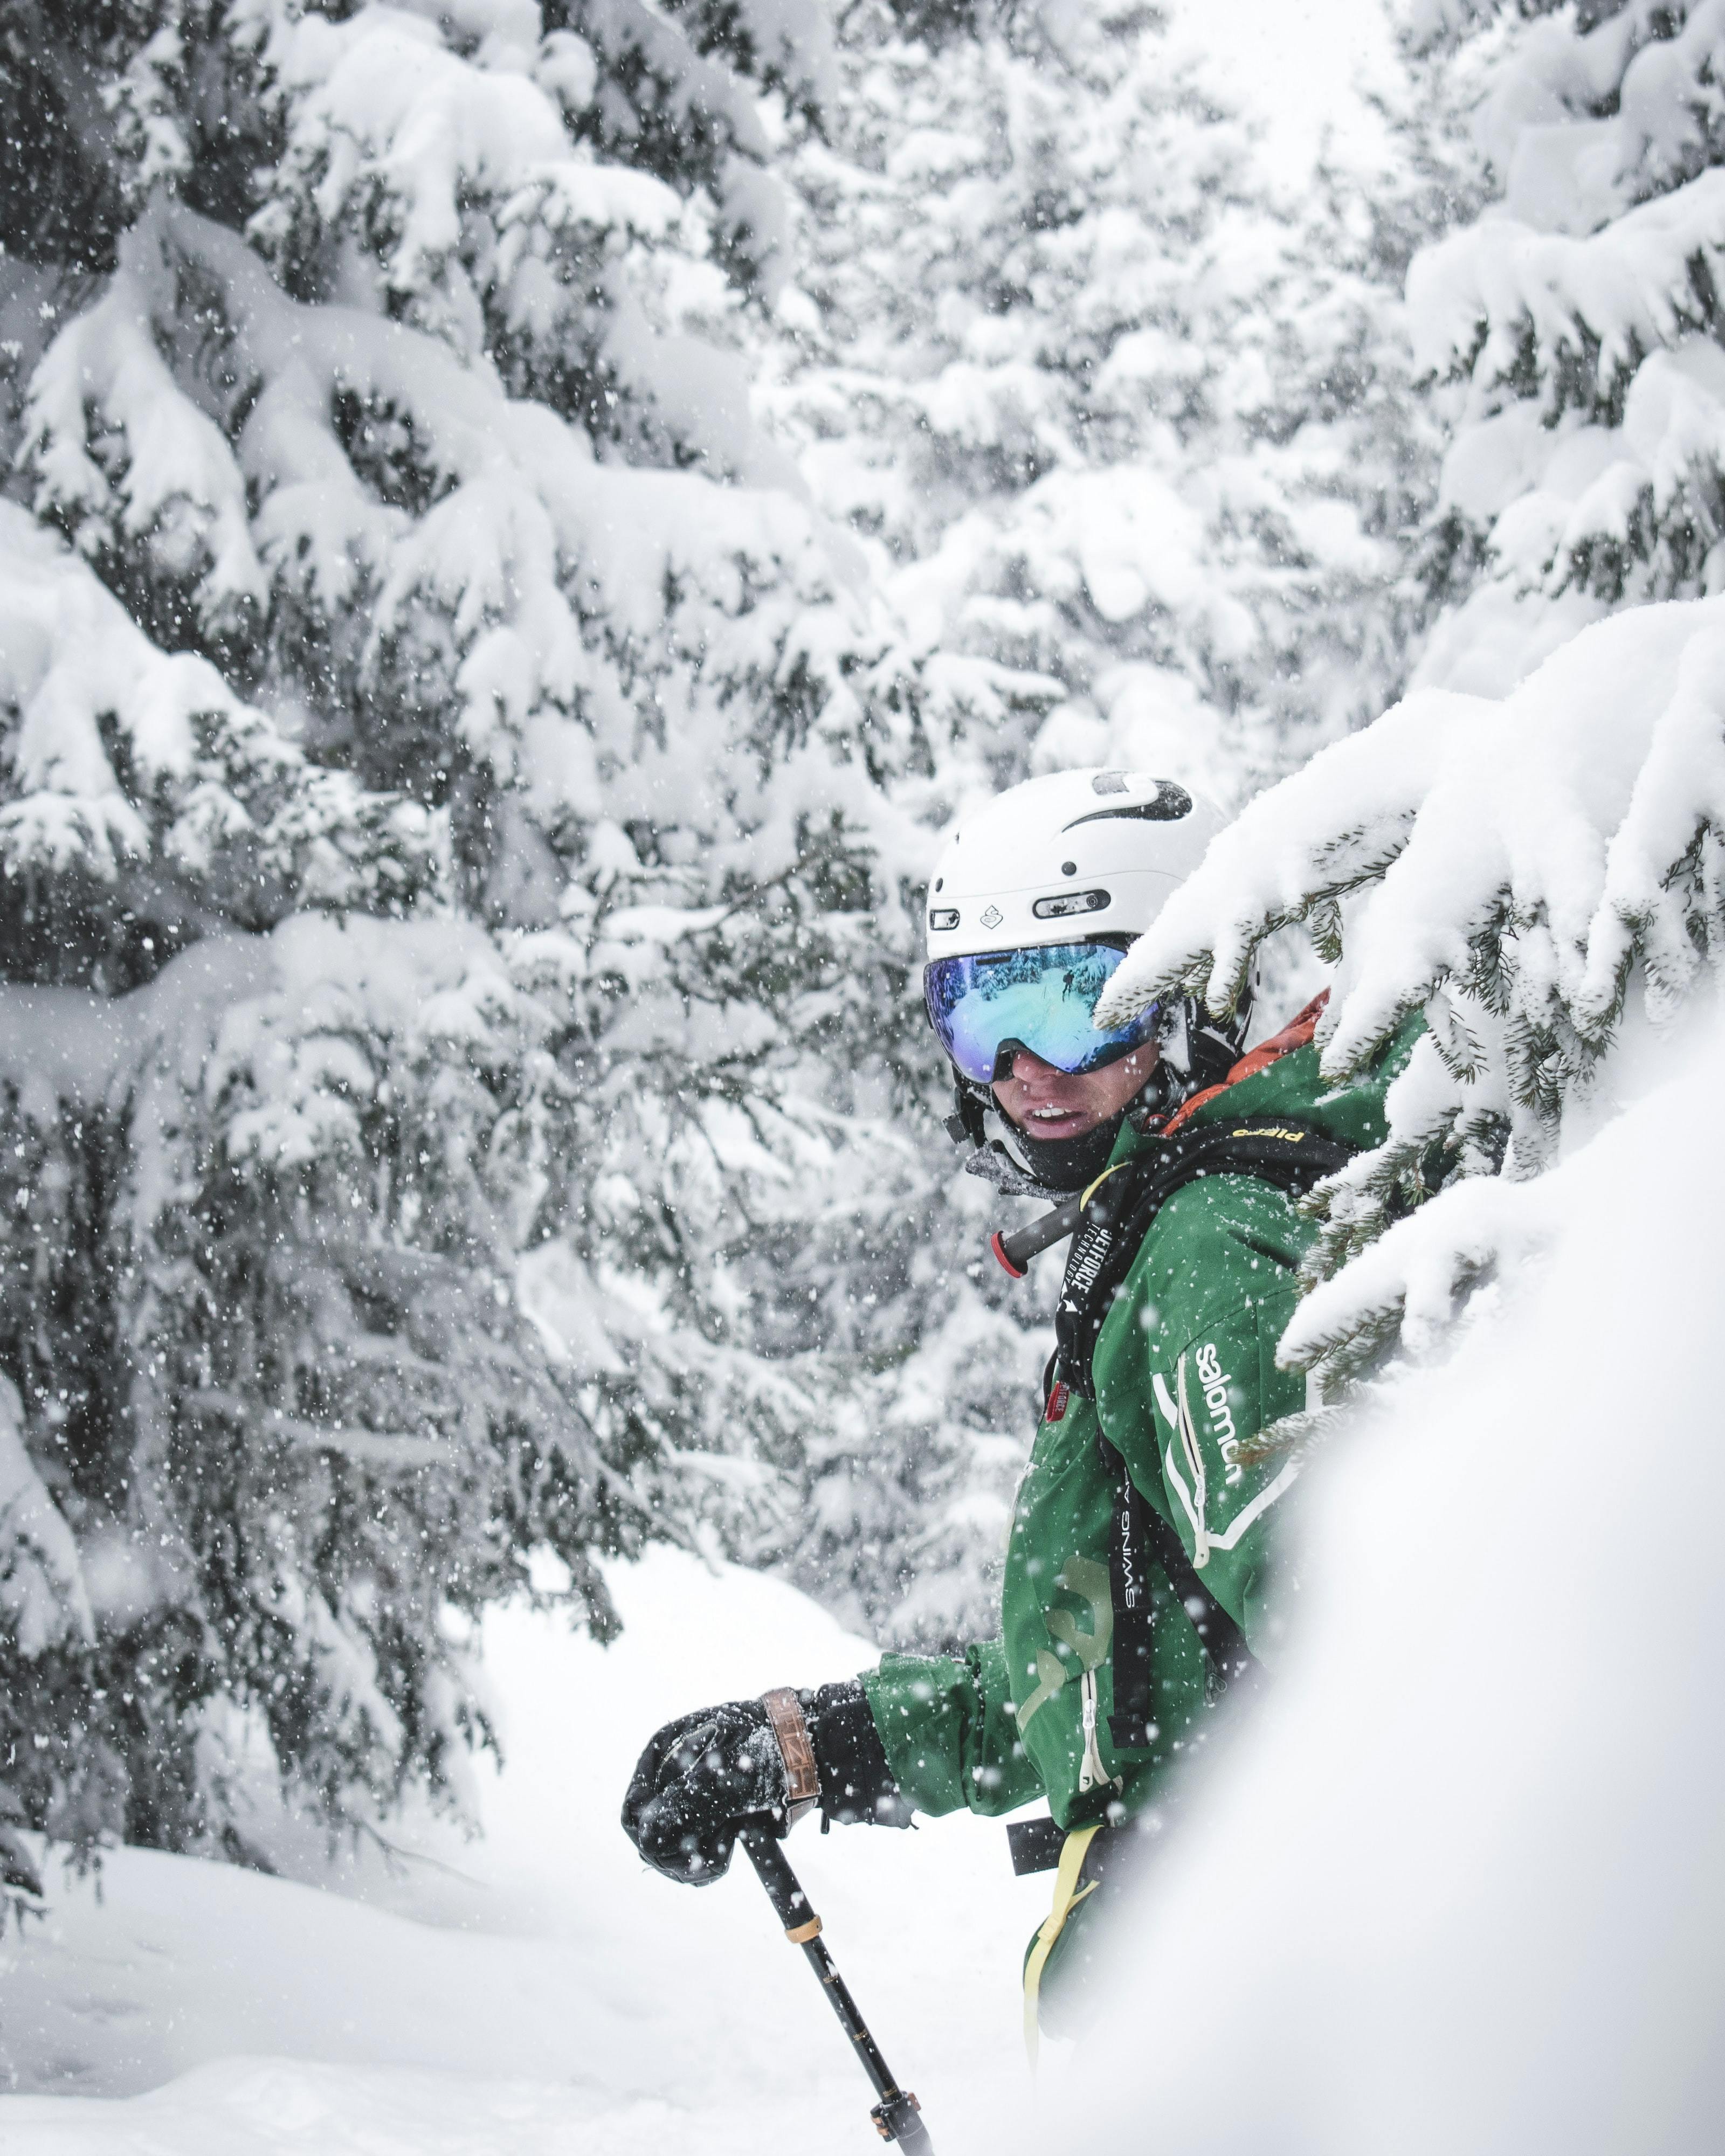 A skier standing in between some snowy trees. He is wearing a helmet and green ski jacket. 